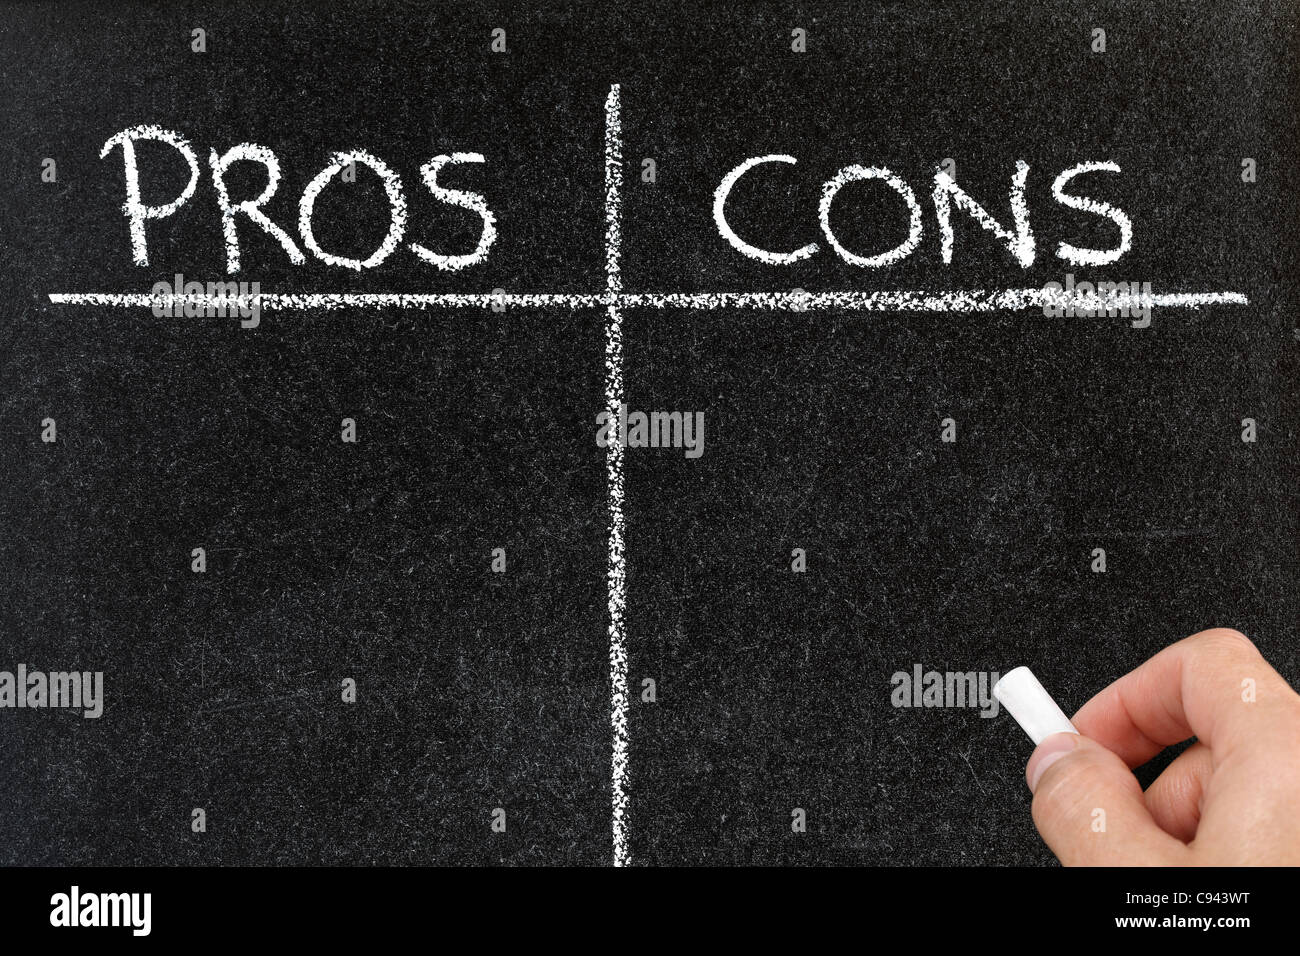 Pros and cons Stock Photo